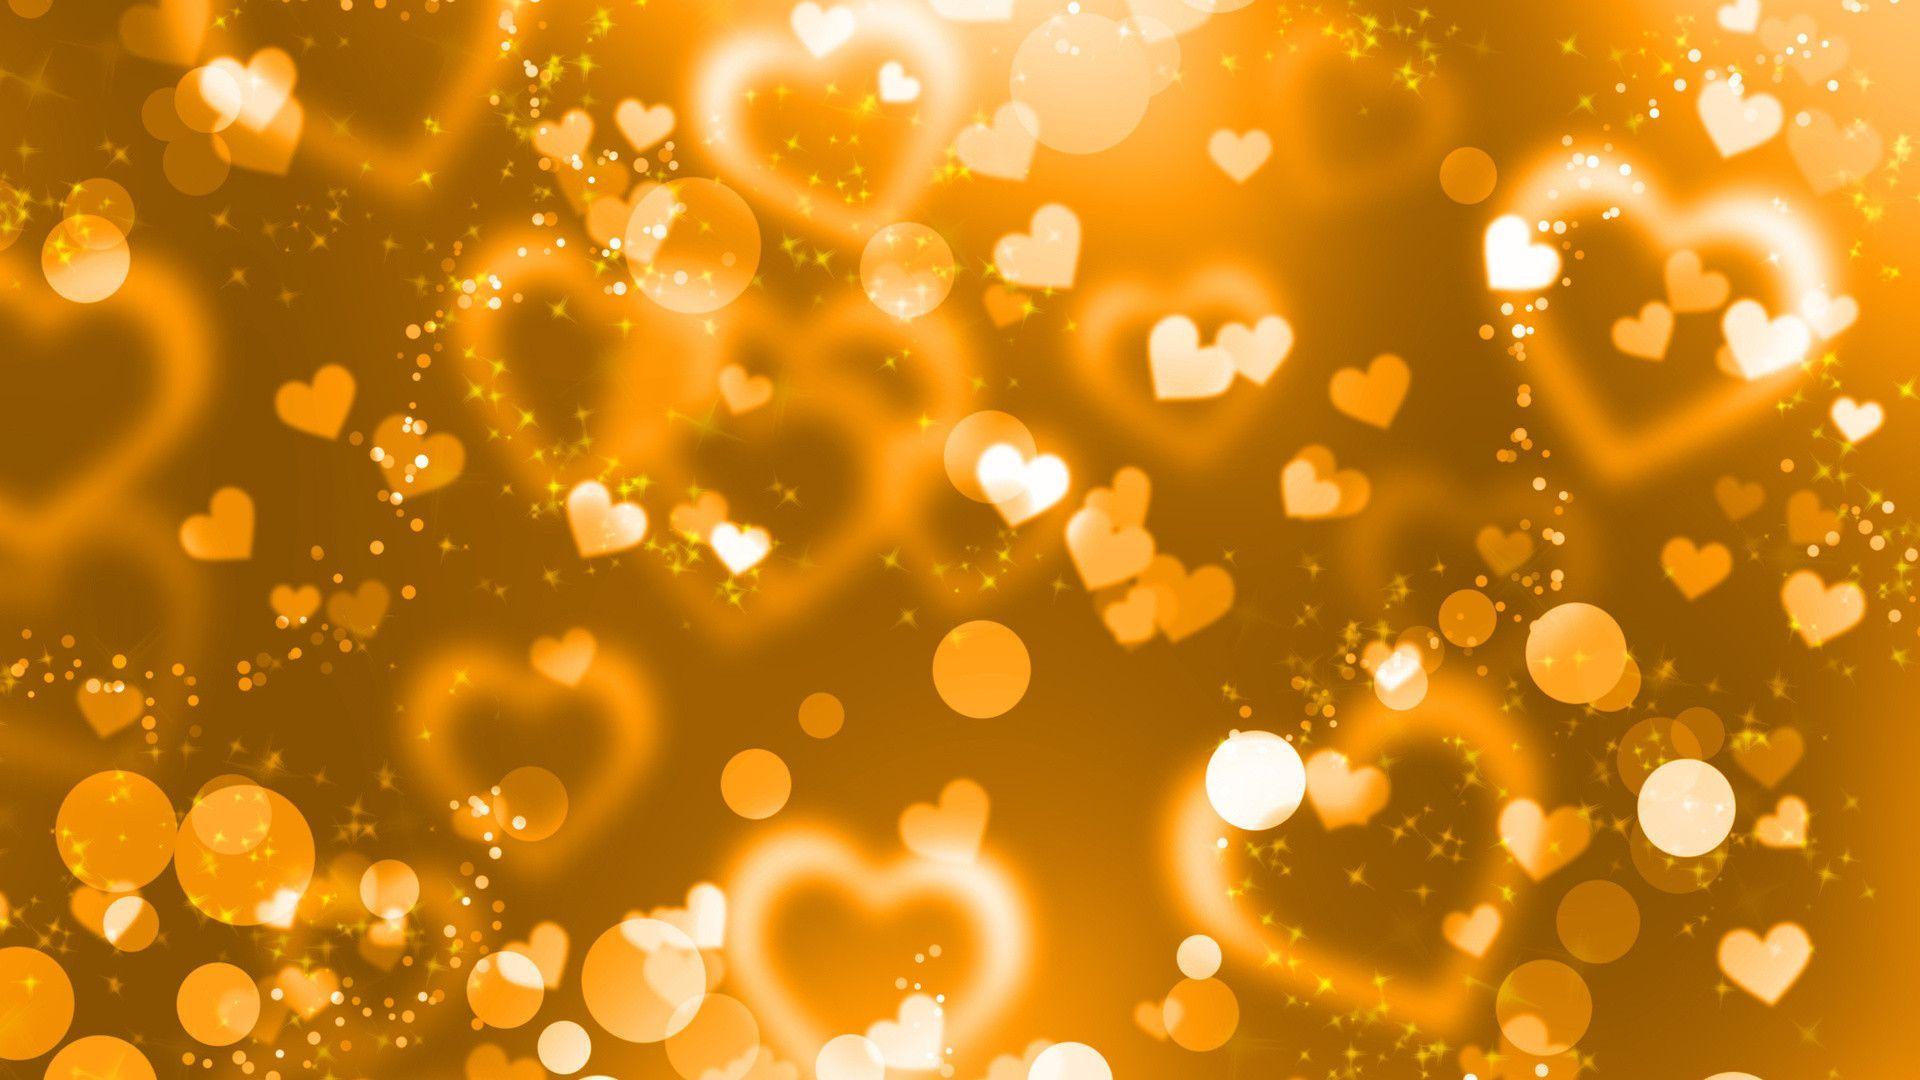 hearted pattern gold powerpoint photos download 